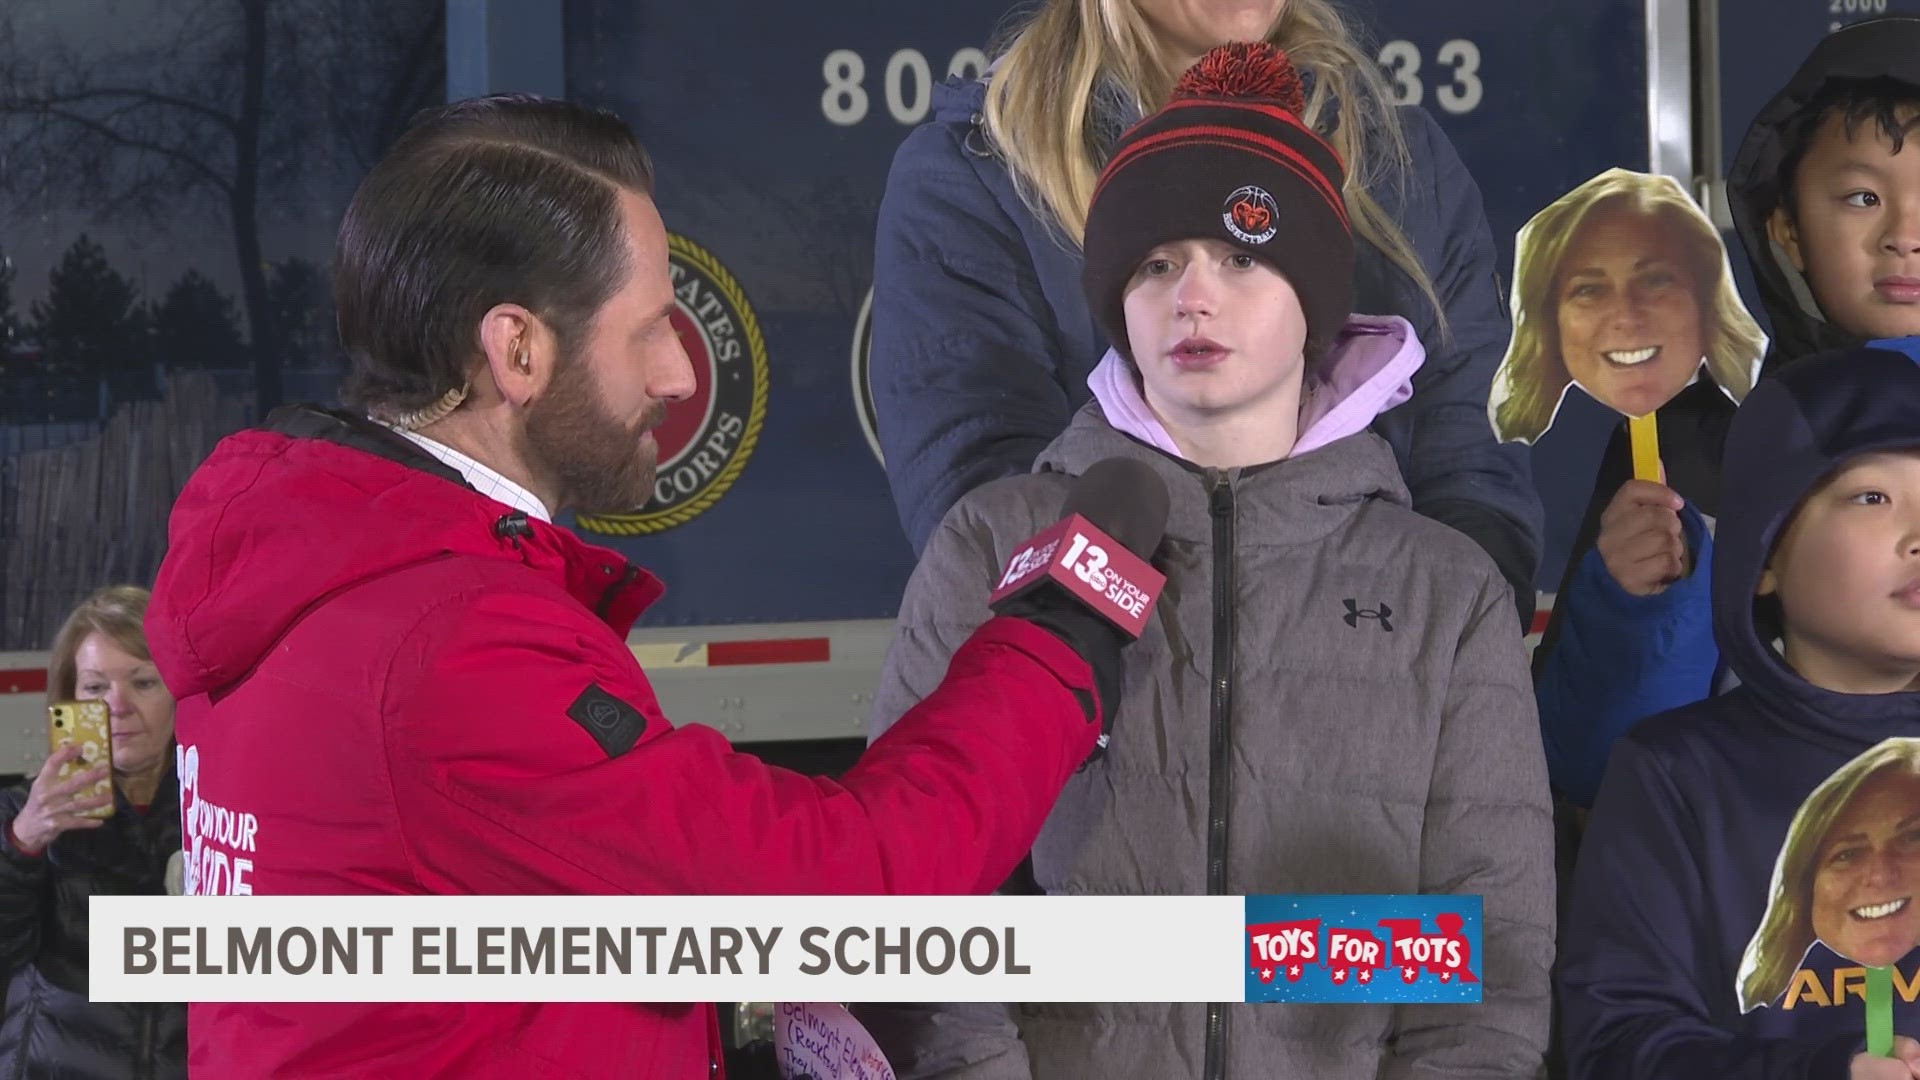 Students said they wanted to make sure all children could wake up excited on Christmas morning.